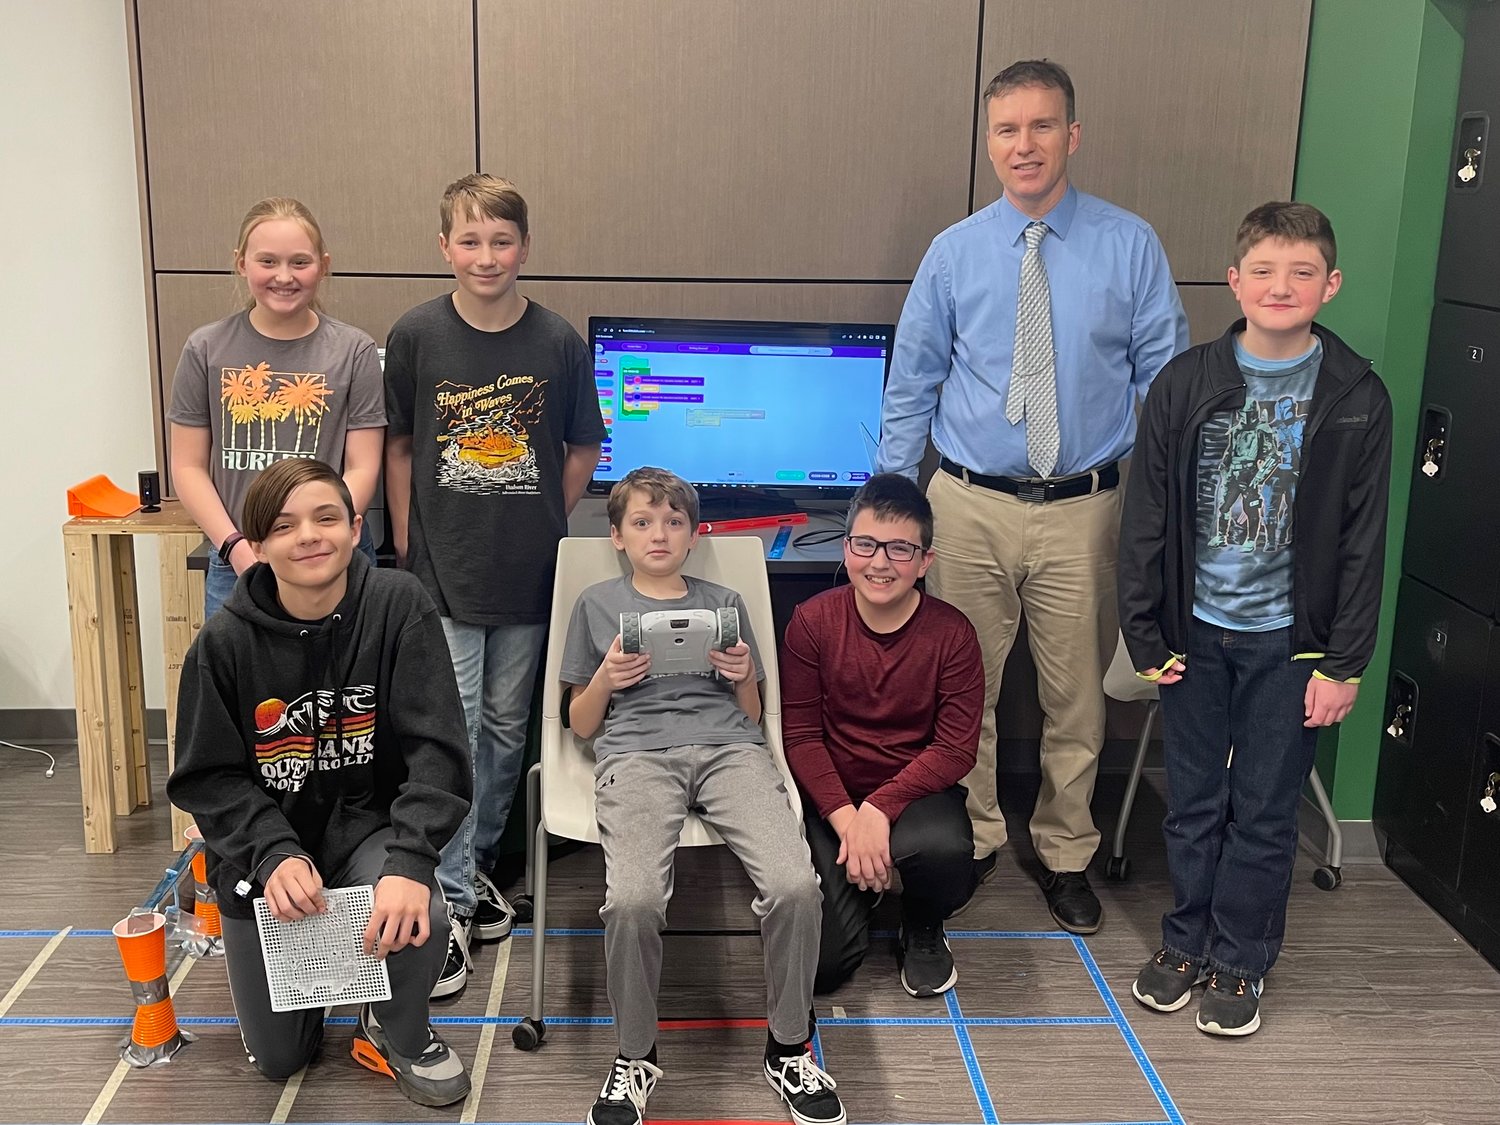 HEADED FOR WORLD CHAMPIONSHIPS — A team of Adirondack Central School sixth-graders have advanced to compete in the Sphero World Championships, a STEAM-based competition. From left: front row: Logan Peters; Ryan Girouard; and Drew Weber; back row: Makayla Ward; Charlie Hinsdill; Justin Wiedrick, district teacher and team coach; and Dominic Reppard.